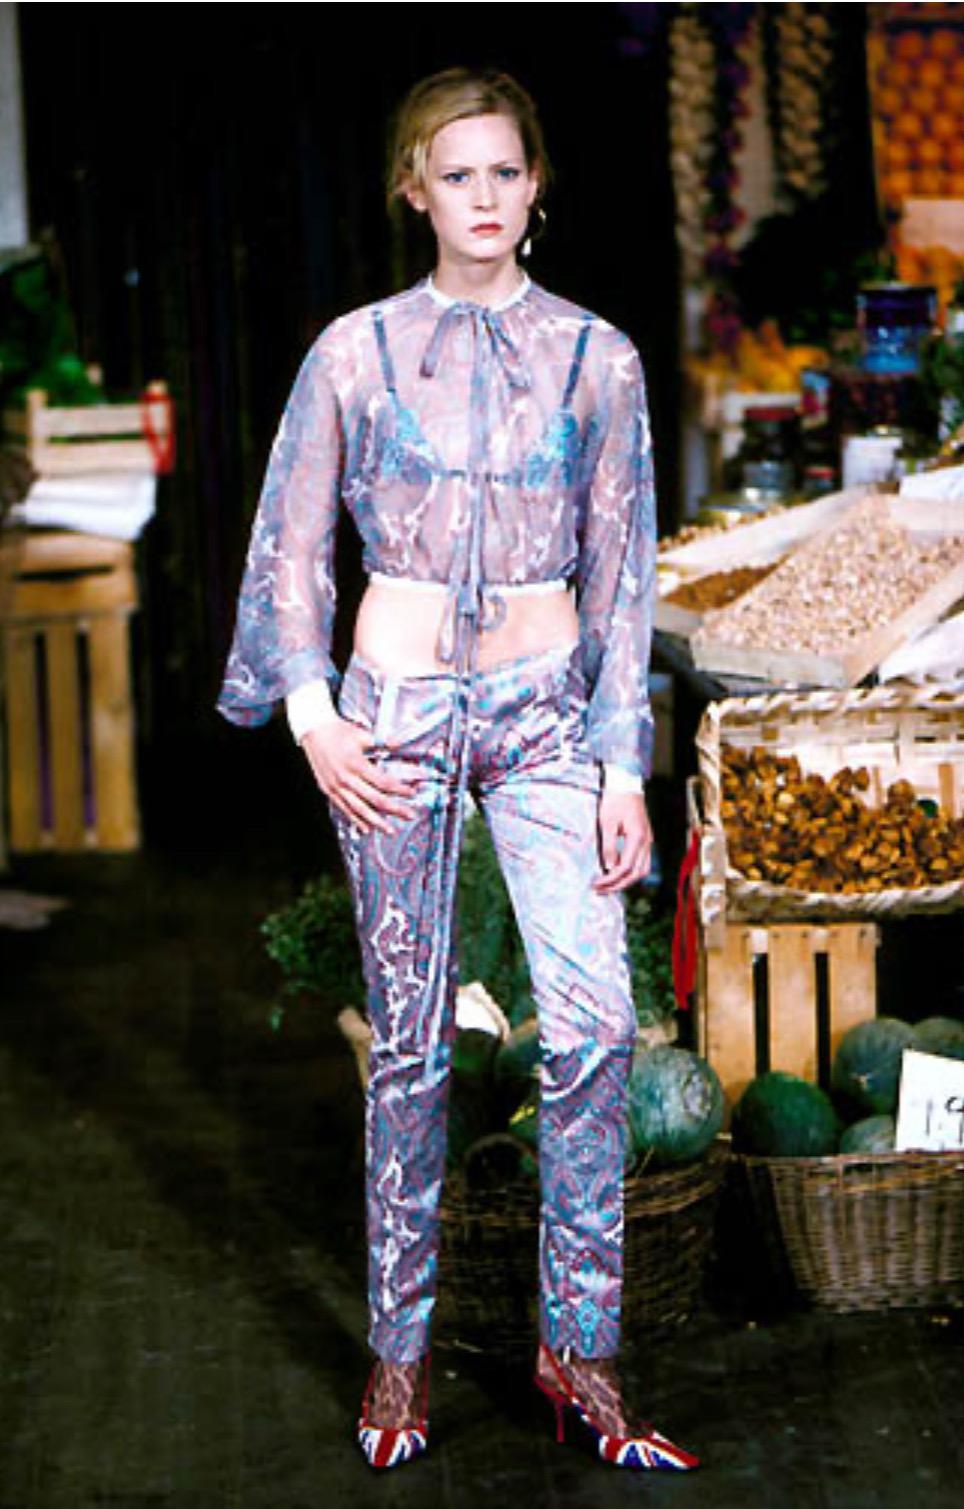 Presenting a pair of stunning paisley satin Dolce and Gabbana pants. From the Spring/Summer 2000 collection, these fabulous cropped pants debuted on the season's runway as part of look 26 modeled by Emily Sandberg. The pants feature a bright pink